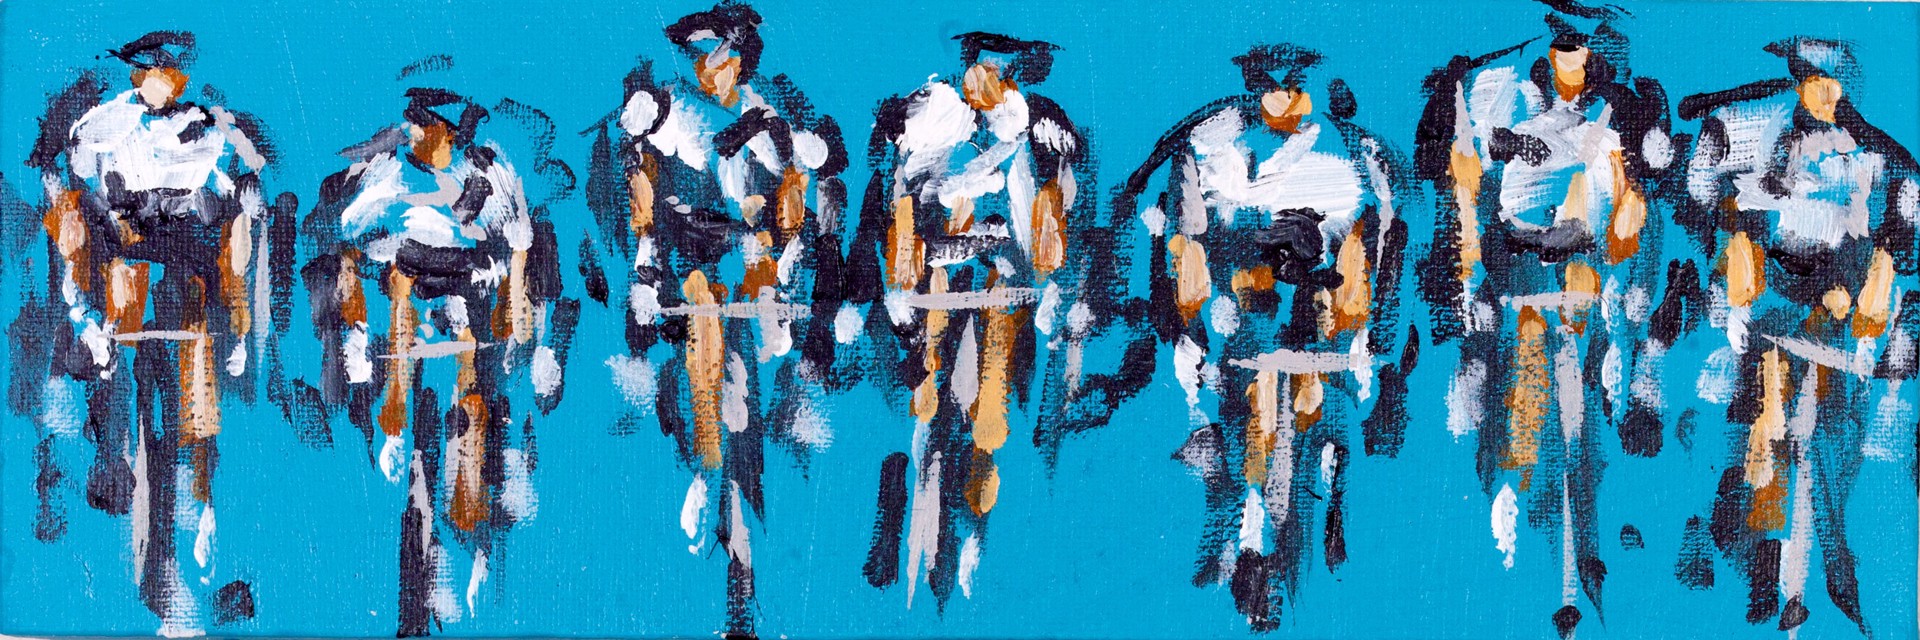 Line of Cyclists on Turquoise by Heather Blanton